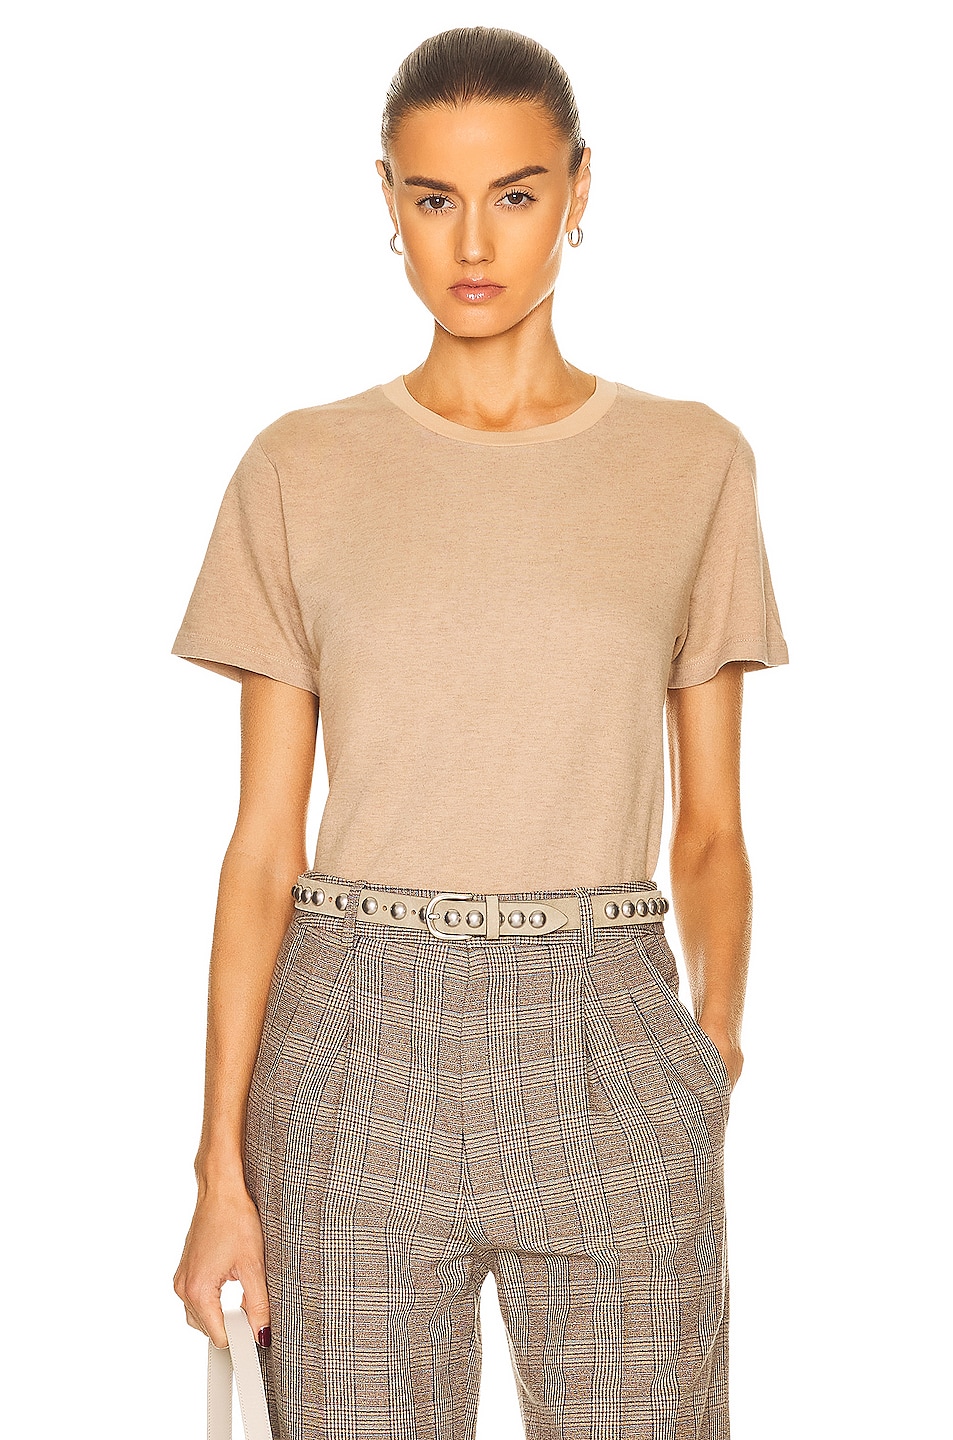 Image 1 of The Elder Statesman Cashmere Super Soft Short Sleeve Tee in White & Almond